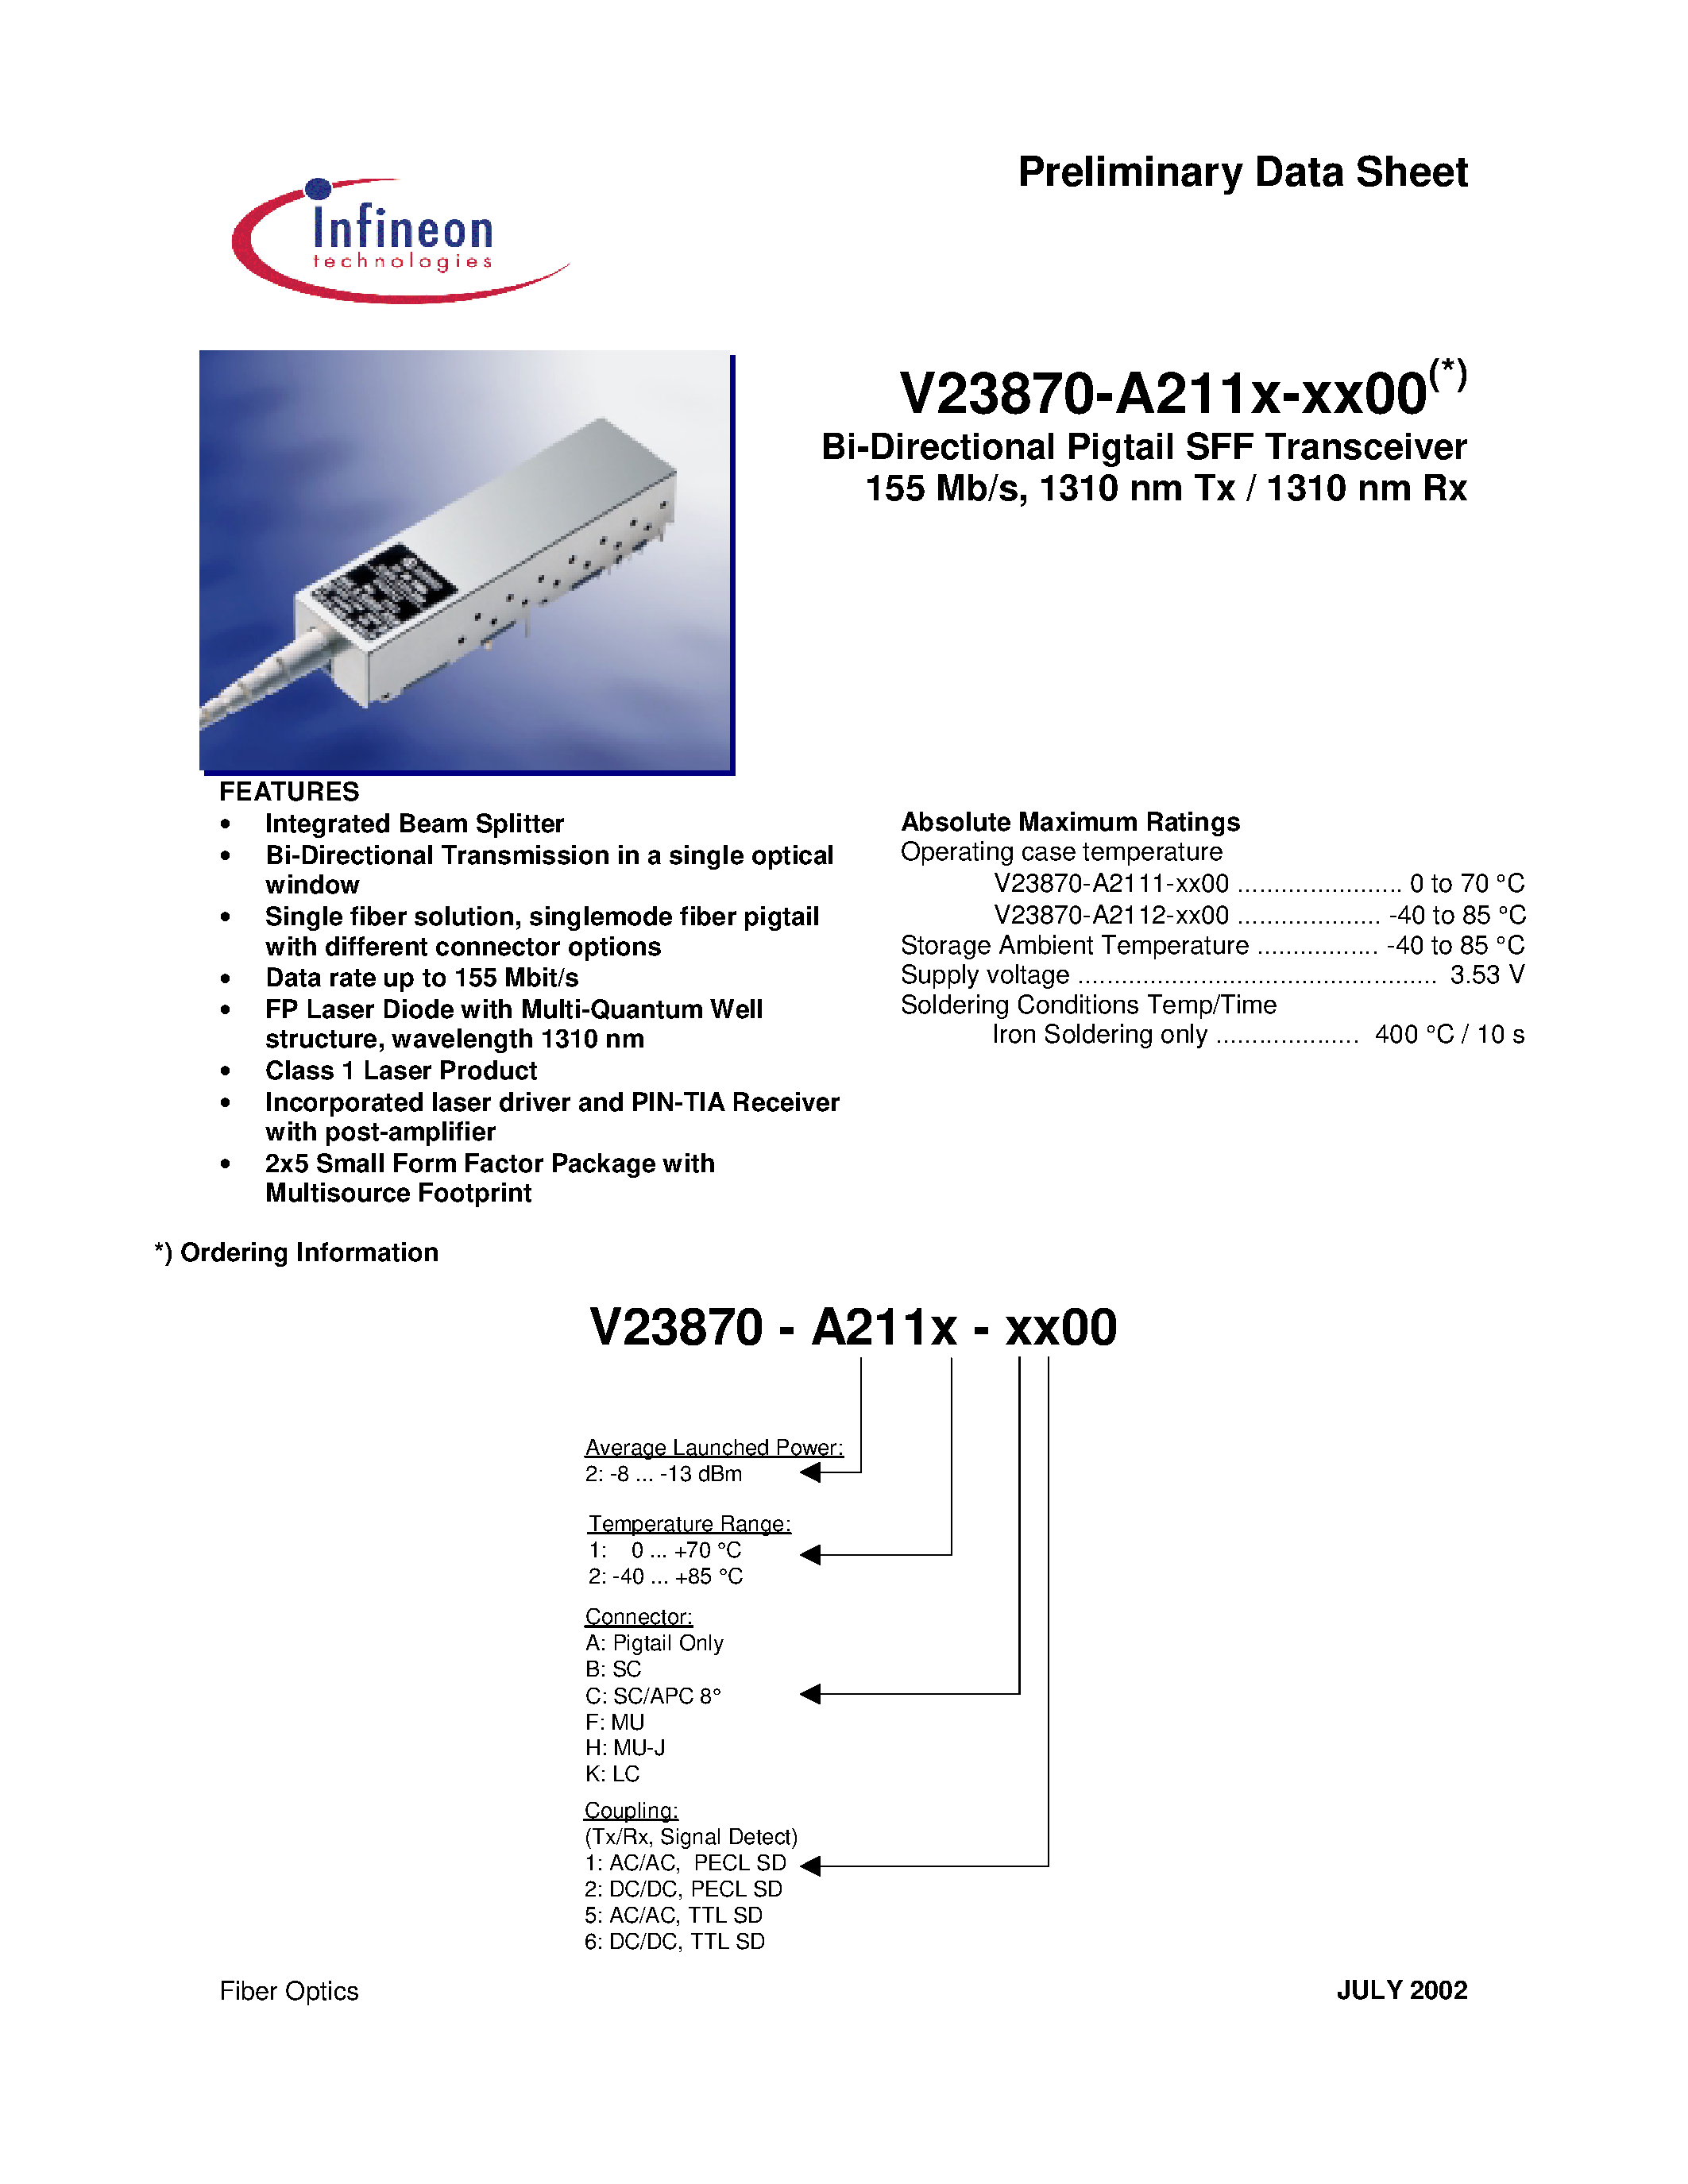 Datasheet V23870-A2112-C600 - Bi-Directional Pigtail SFF Transceiver 155 Mb/s/ 1310 nm Tx / 1310 nm Rx page 1